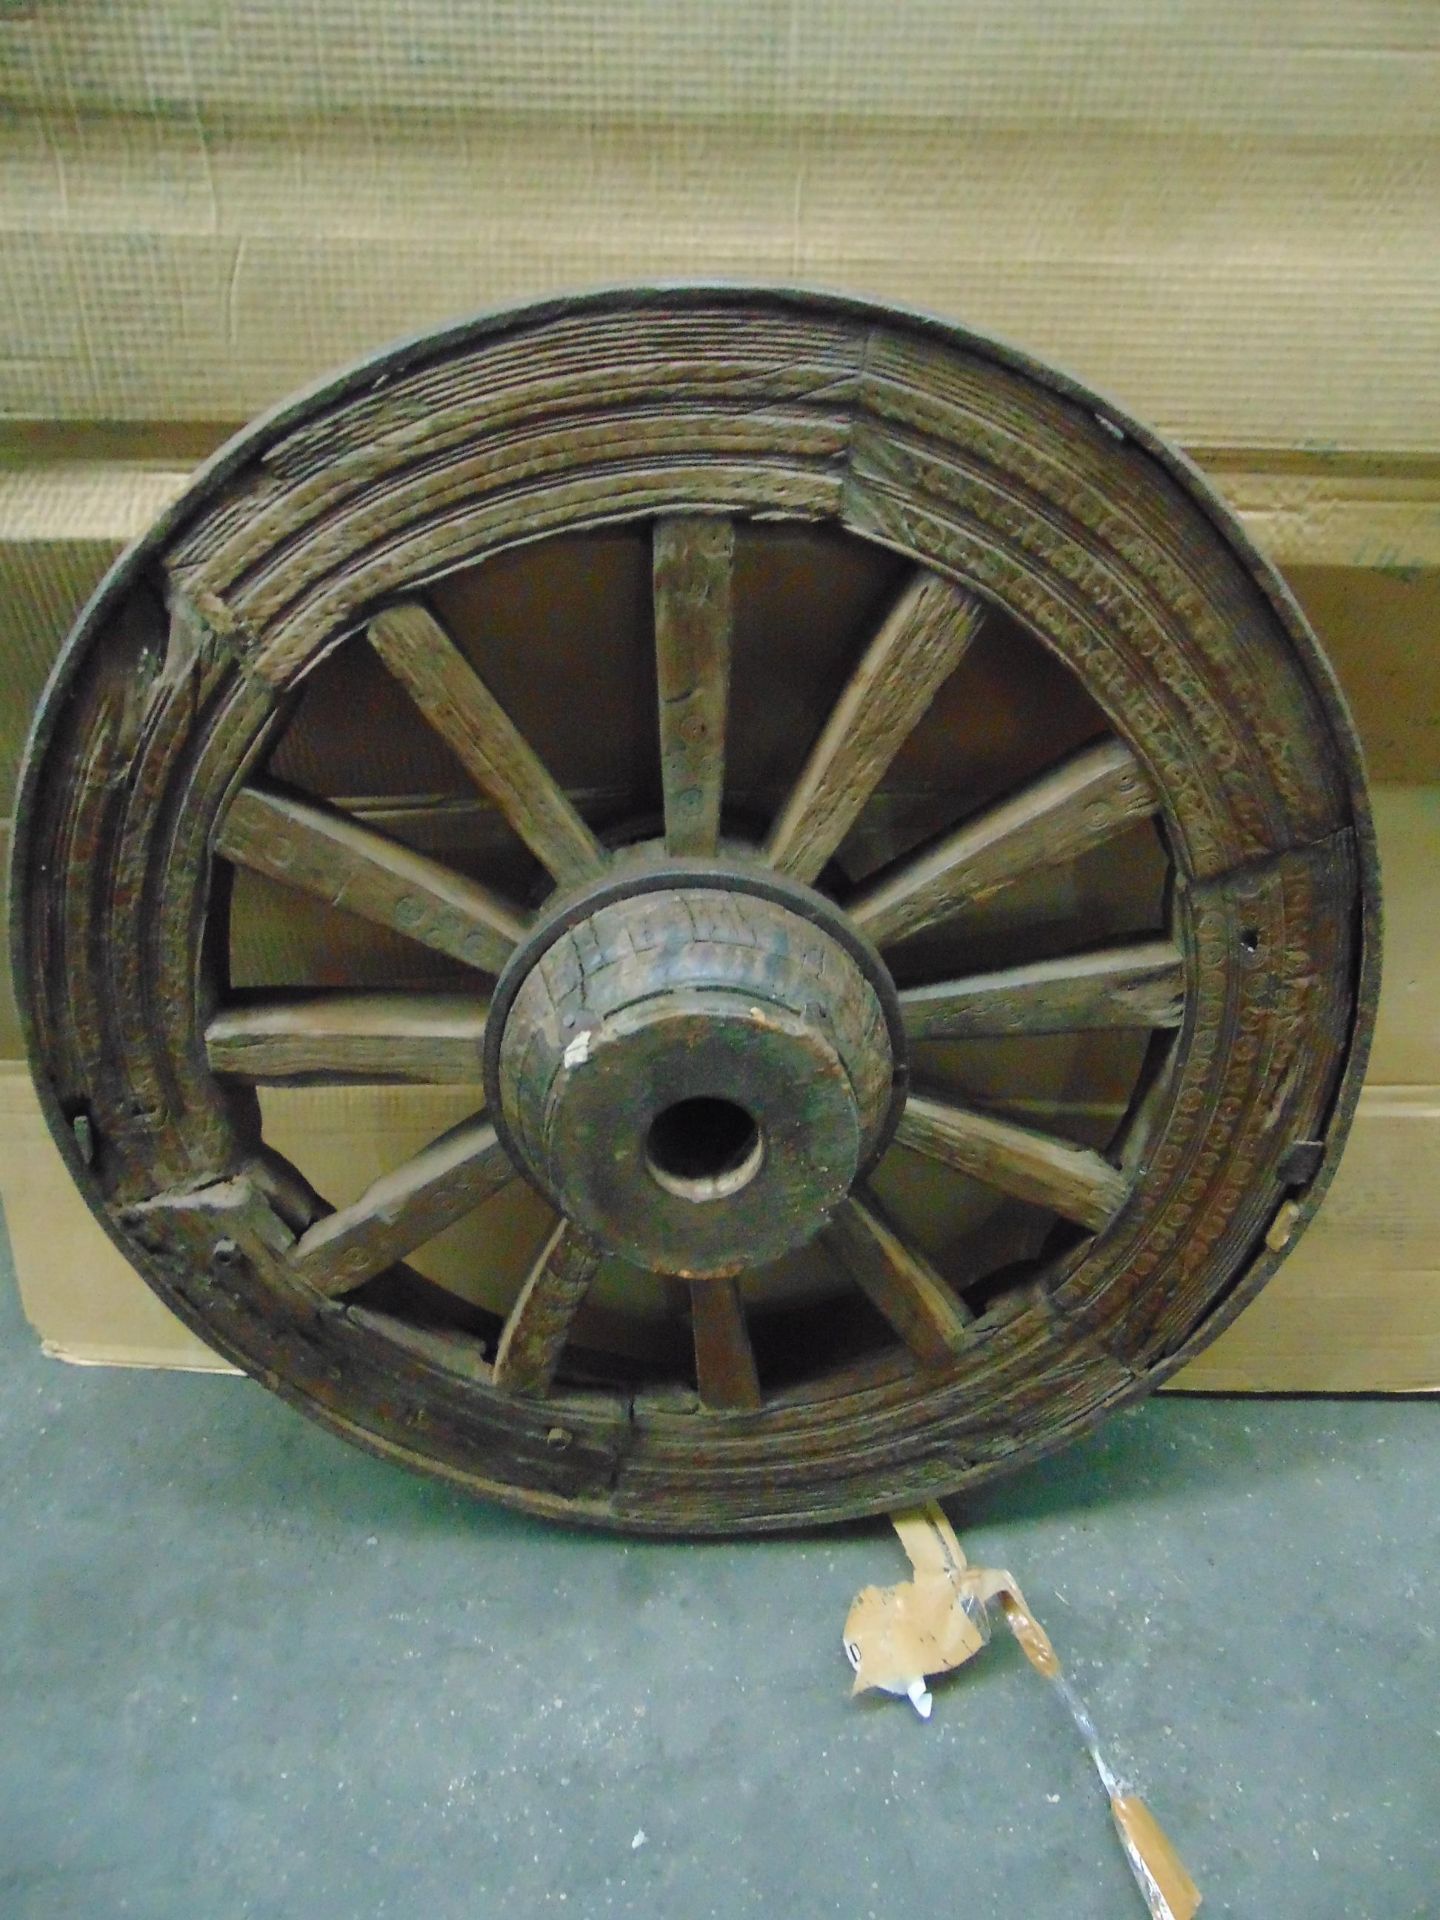 VERY RARE ANTIQUE WOODEN WAGON WHEEL WITH STEEL RIM, WOODEN SPOKES - 85 CMS - Image 2 of 6